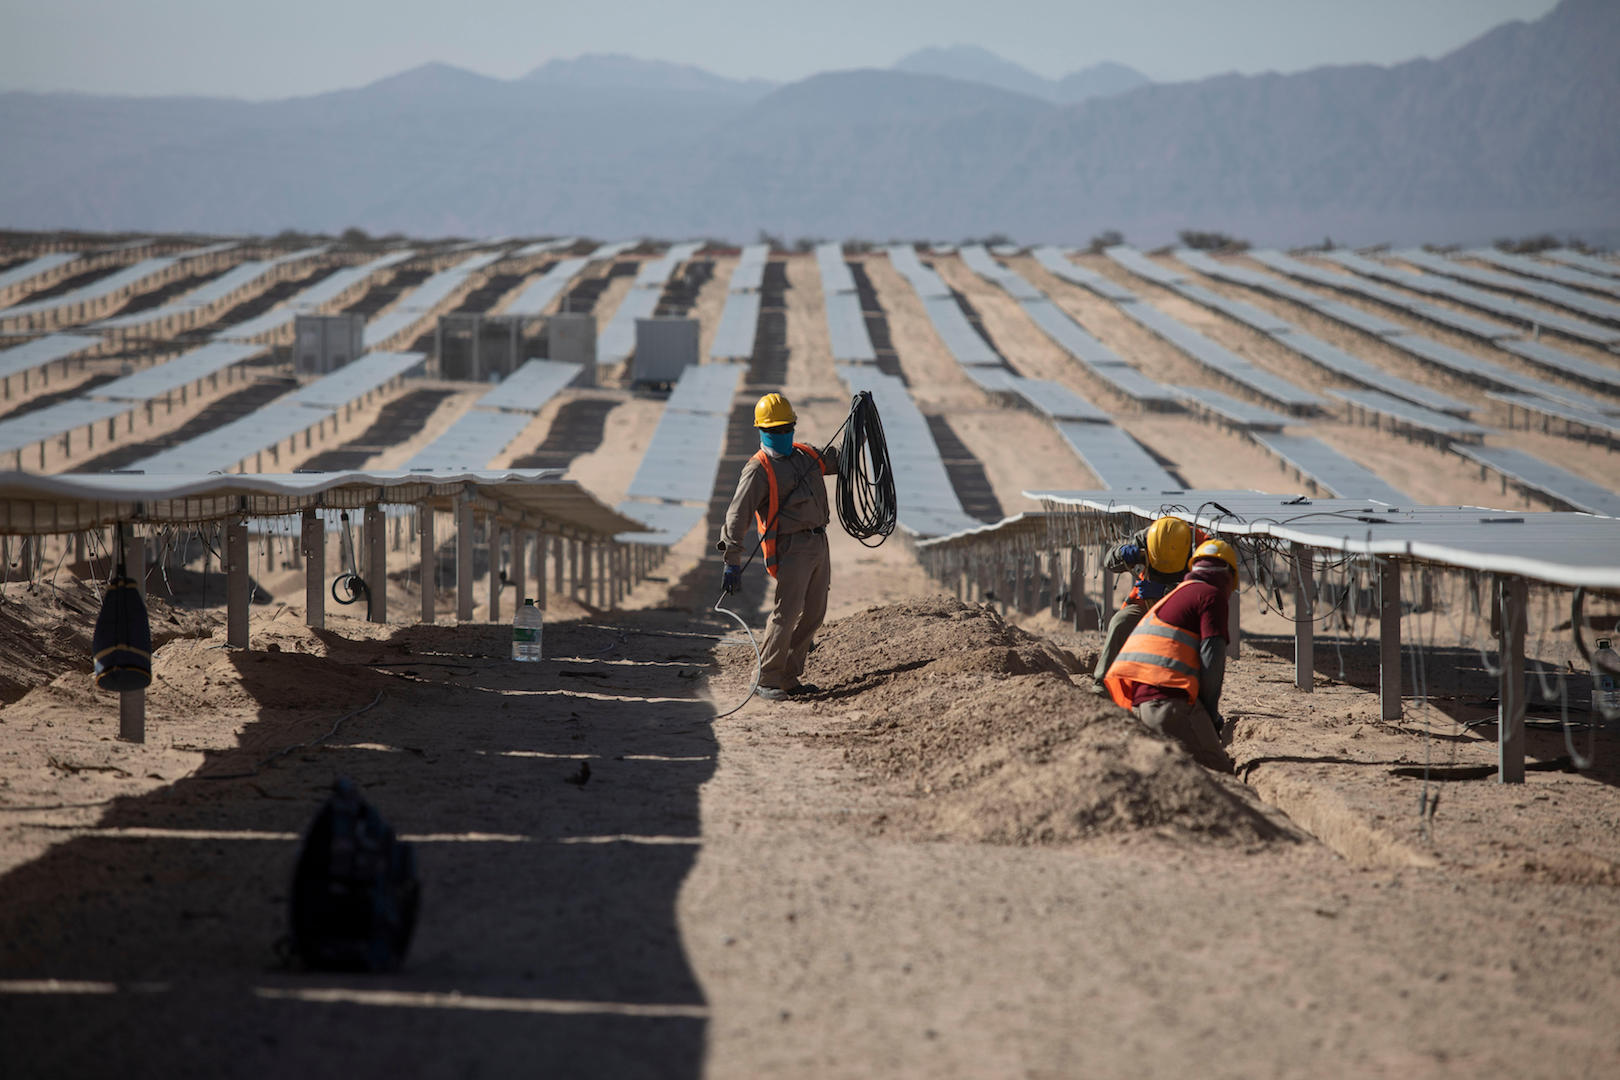 <p>Solar photovoltaic plants such as the one at Cafayate, Salta province, can help Argentina achieve carbon neutrality, according to new research (image: Alamy)</p>